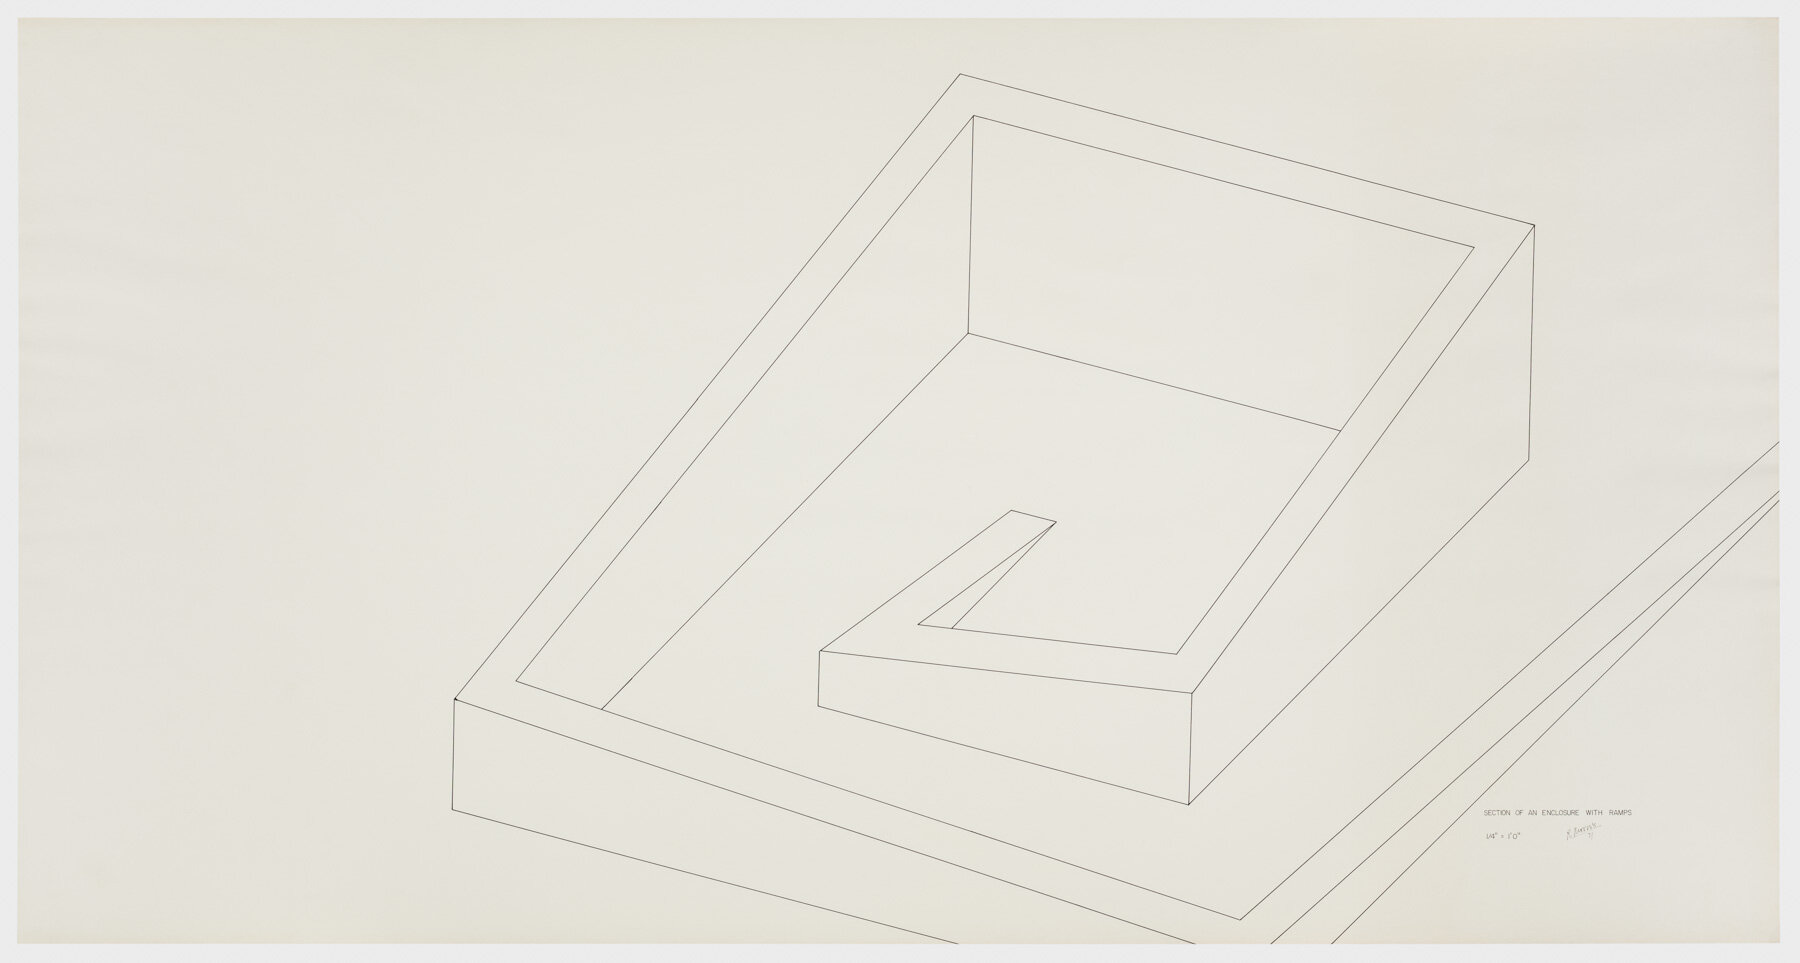  Robert Morris. Section of an Enclosure with Ramps, 1971. Ink on paper, 42 ¼x 80 ½in. (107 x 204 cm). Estate of Robert Morris, courtesy Castelli Gallery, New York. © 2019 The Estate of Robert Morris / Artists Rights Society (ARS), New York. Photo: St